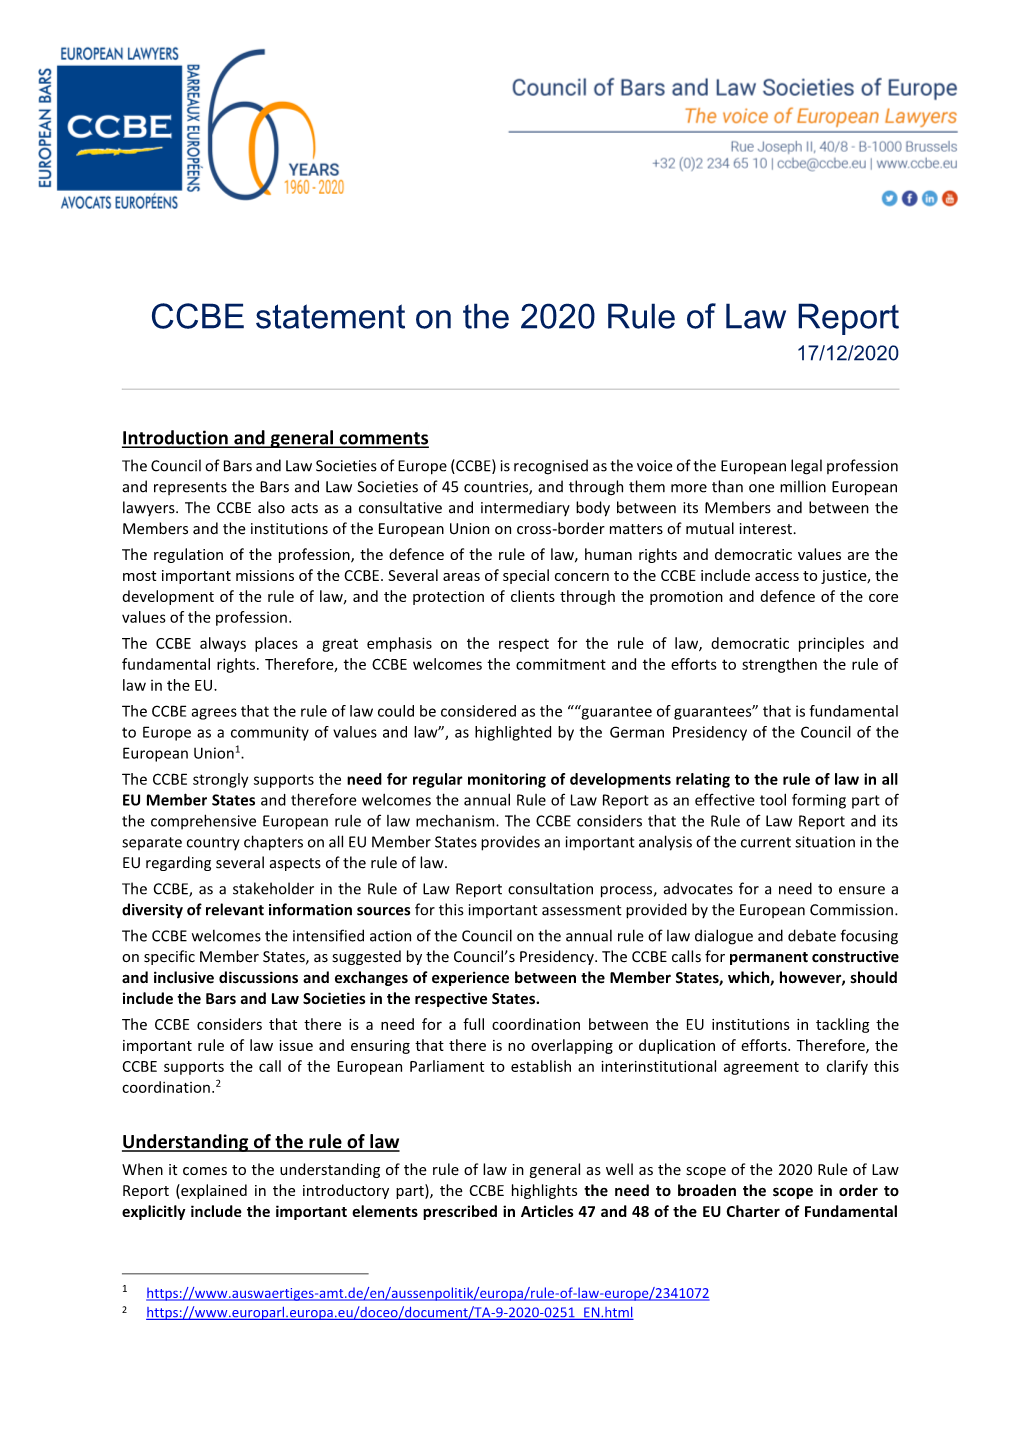 CCBE Statement on the 2020 Rule of Law Report 17/12/2020